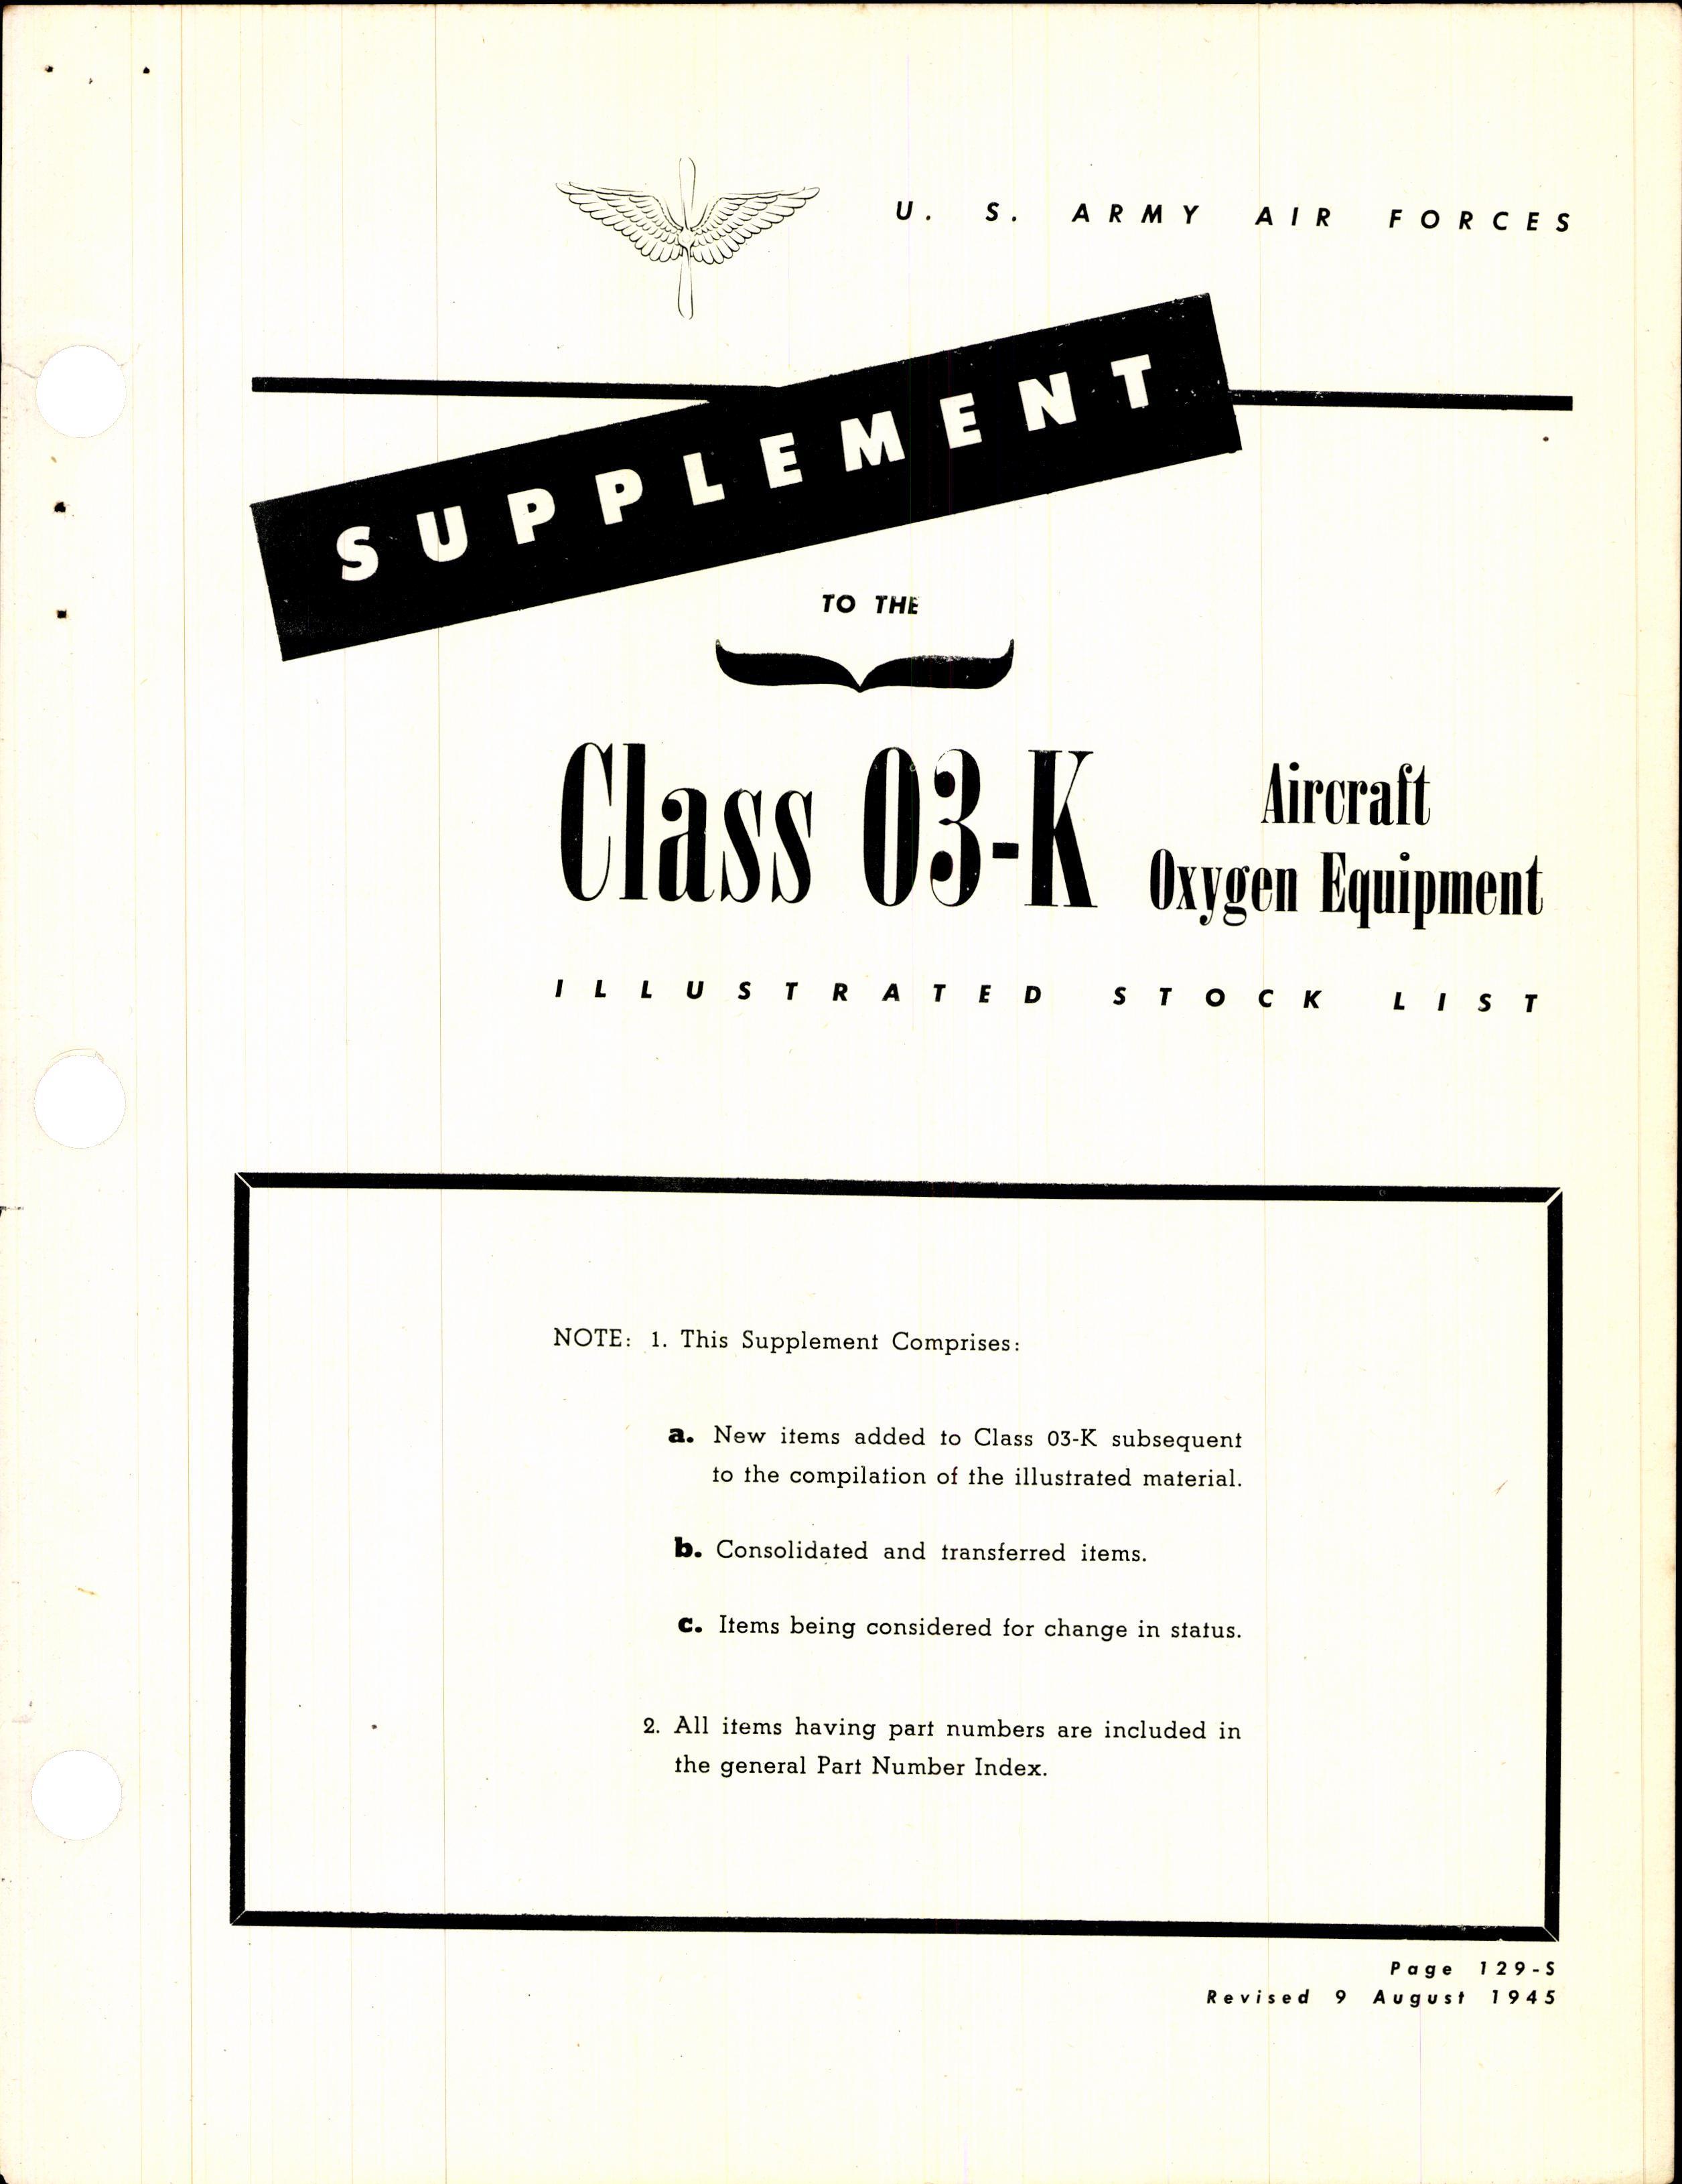 Sample page 7 from AirCorps Library document: Illustrated Stock List for Aircraft Oxygen Equipment